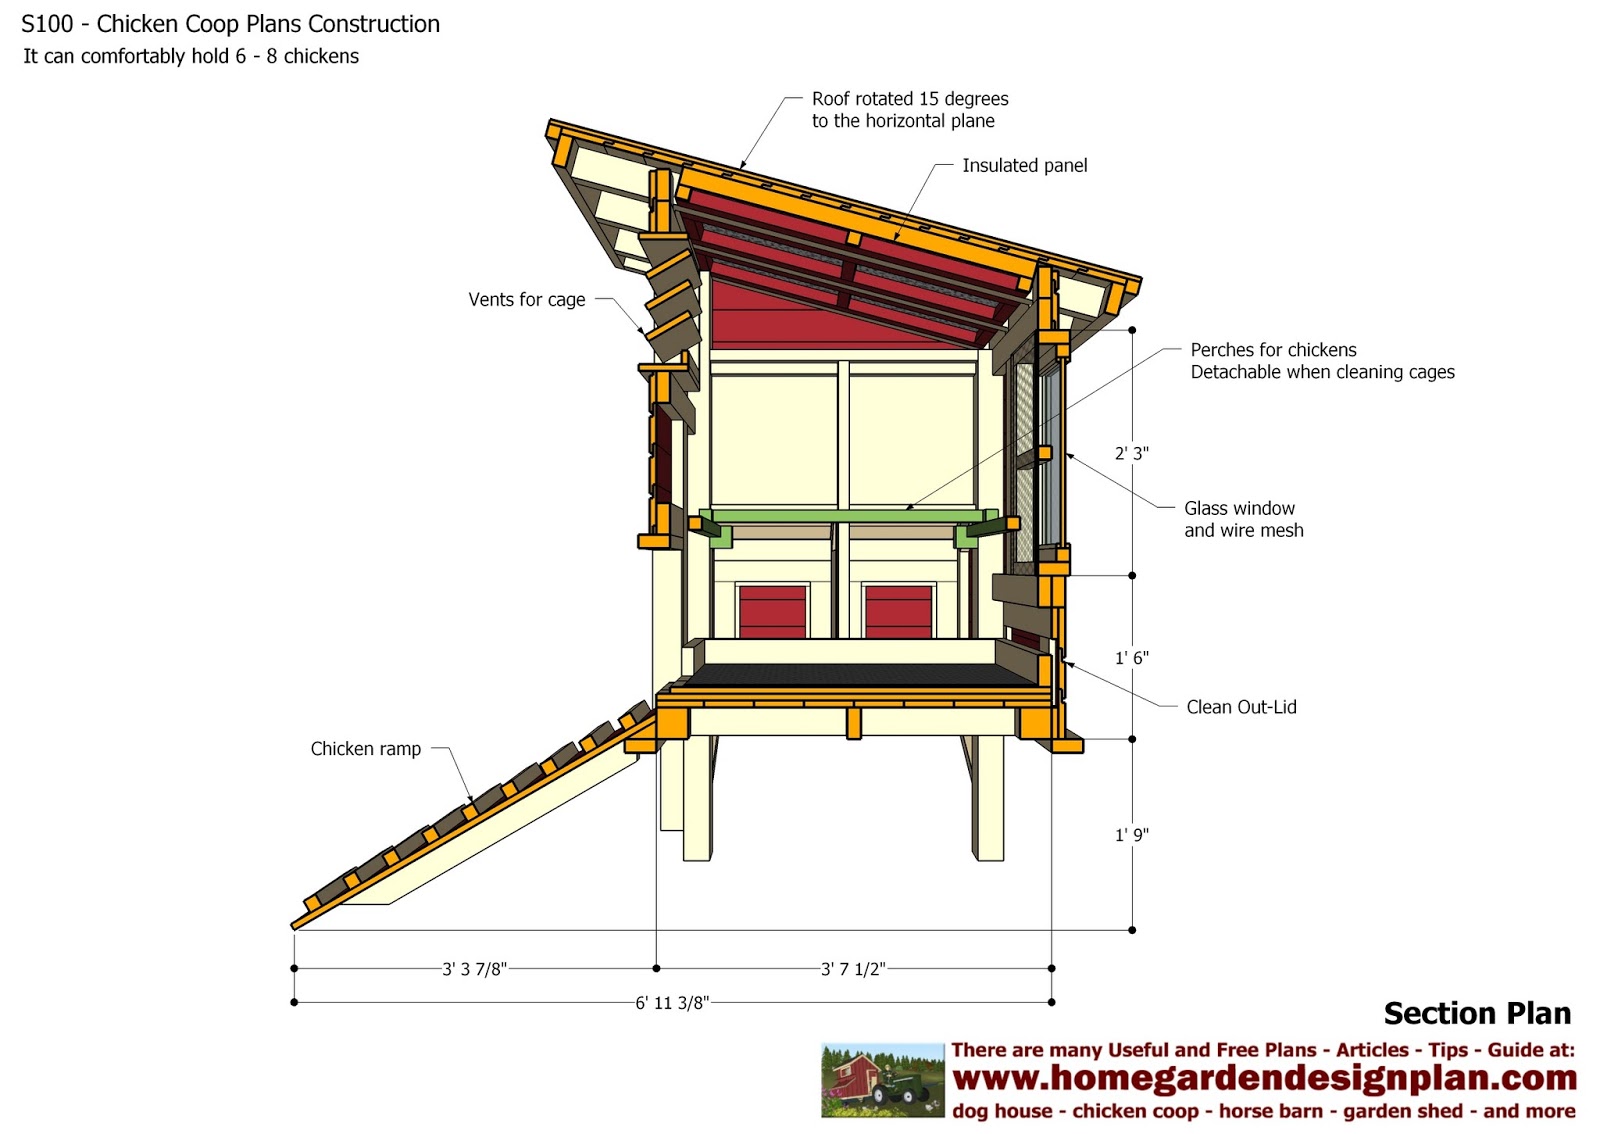 Amish Chicken Coop Plans Download ~ Loung park - 0.7.1+ +S300+ +Chicken+Coop+Plans+Construction+ +Chicken+Coop+Design+ +How+To+BuilD+A+Chicken+Coop